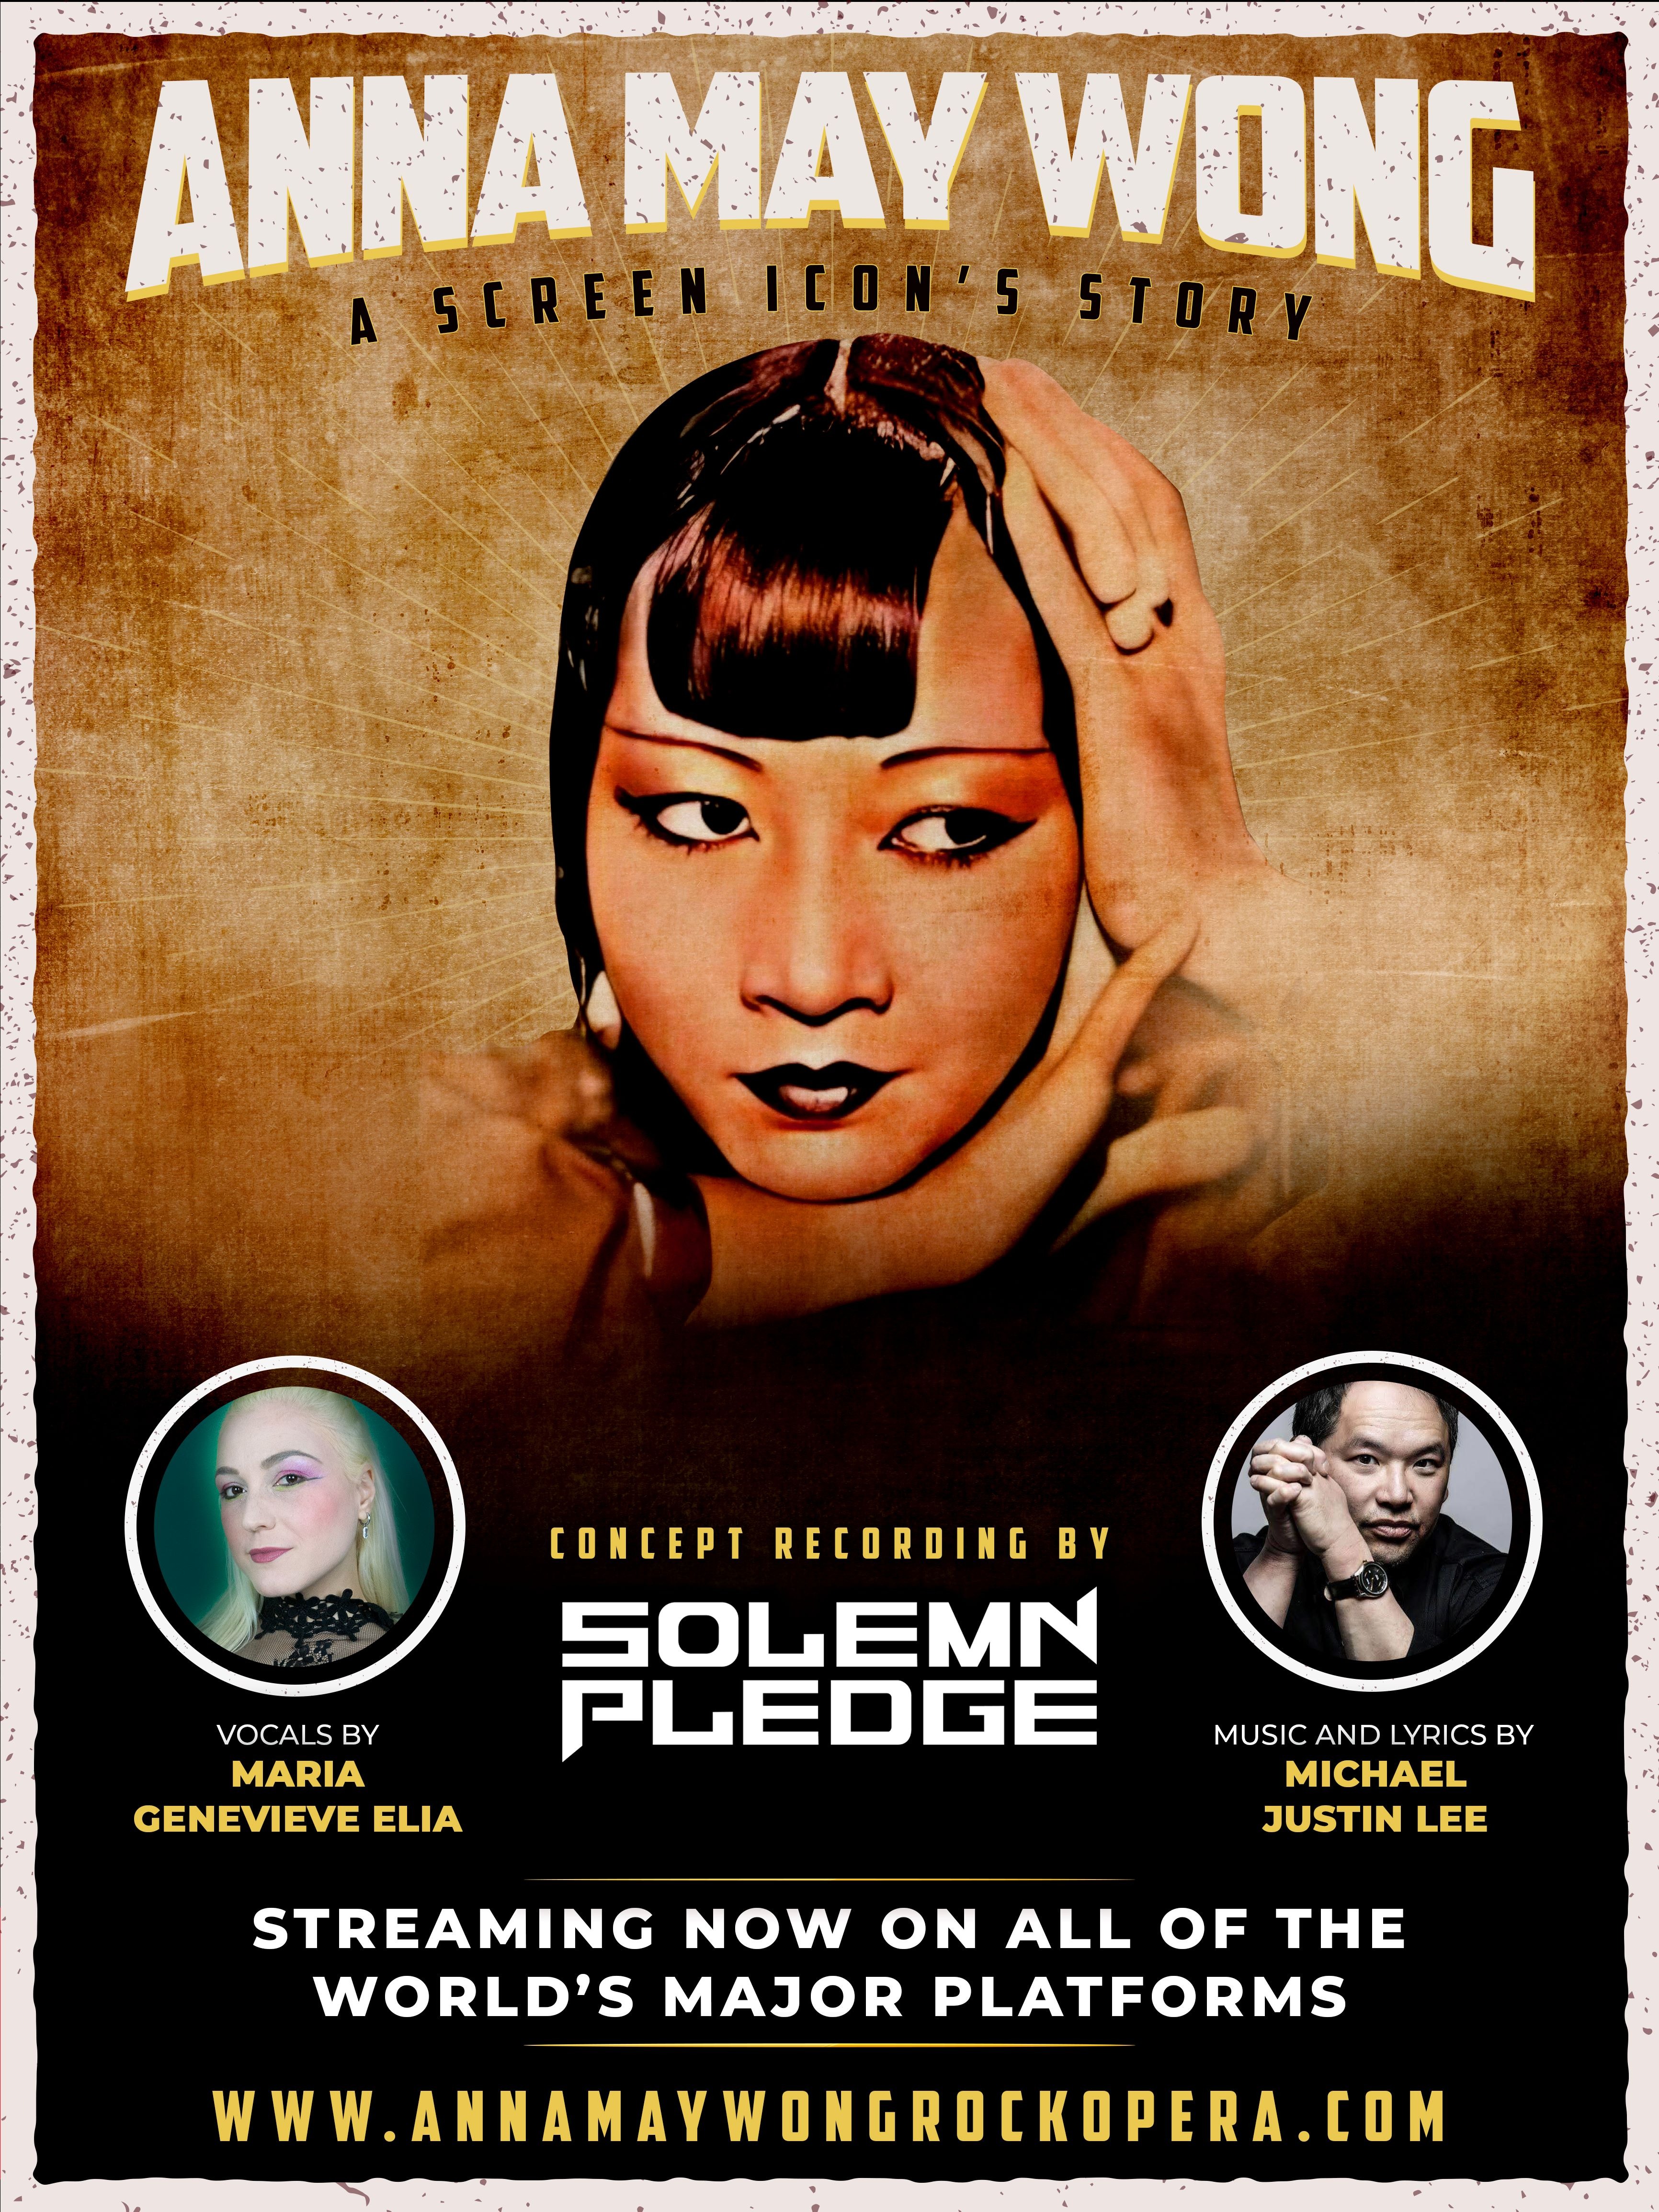 The Tragic and Triumphant Story of the First Asian-American Movie Star, Anna May Wong, Comes to Life in Solemn Pledge’s Brilliant New Rock Opera Concept Album, "Anna May Wong: A Screen Icon’s Story"